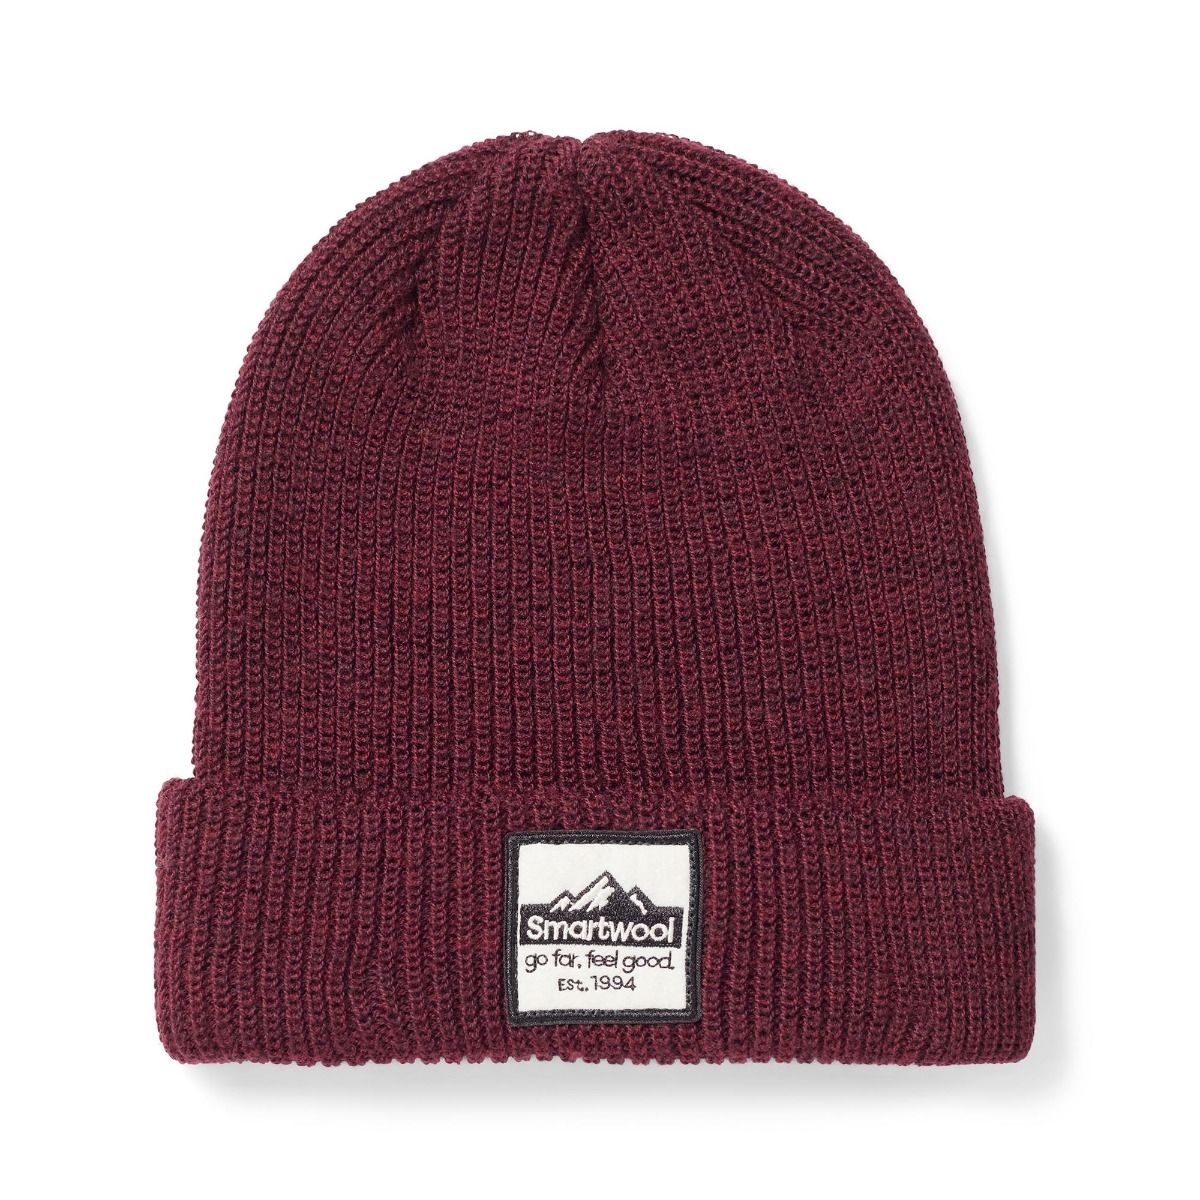  Smartwool Merino Wool Smartwool Patch Beanie For Men And  Women